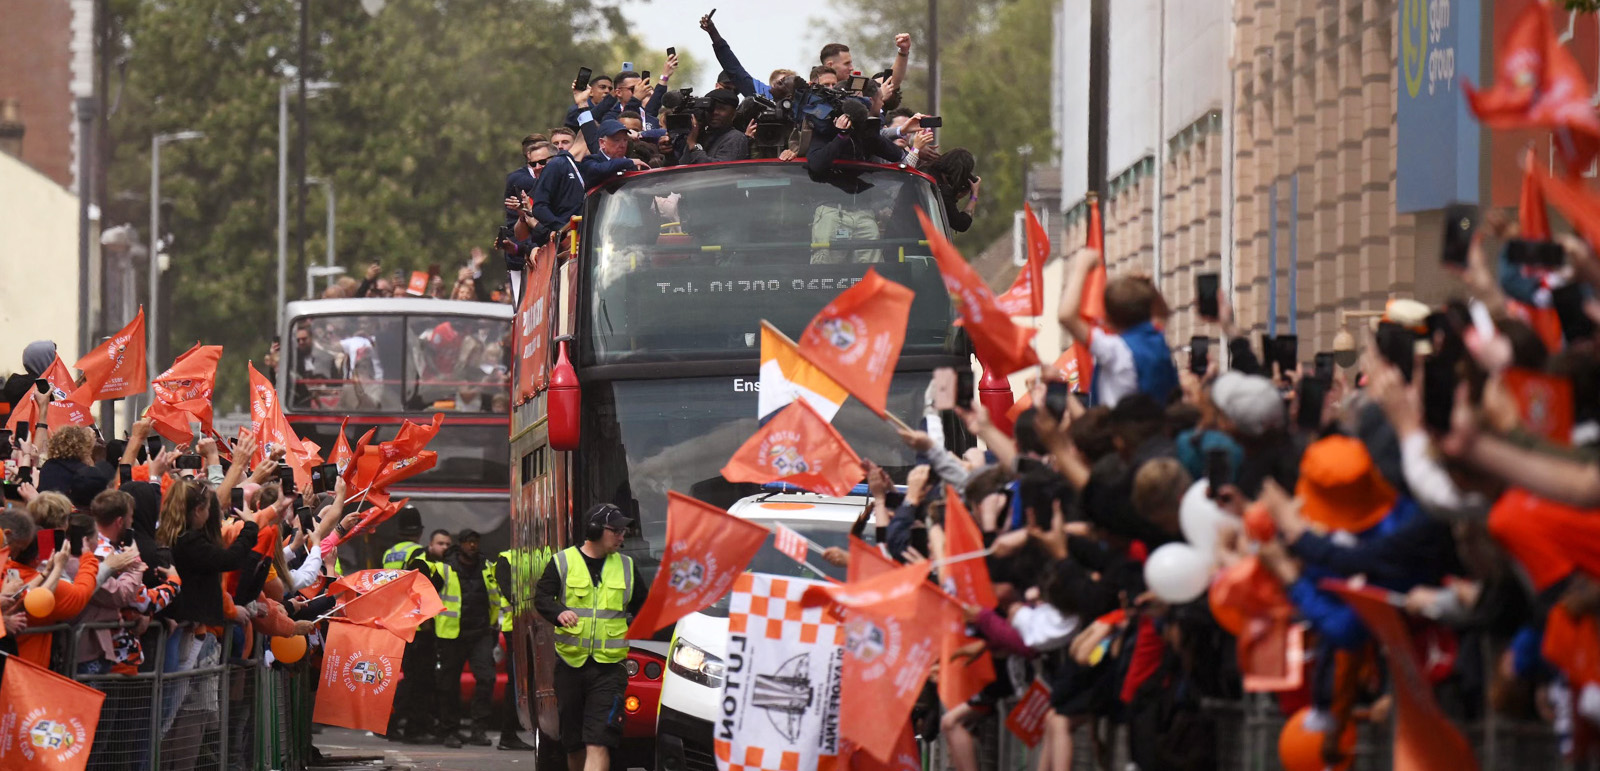 Luton Town football club players and staff parade through the streets of Luton with the Championship playoff trophy in Luton, north of London on May 29, 2023, as they celebrate their promotion to the English Premier League. Luton completed a fairytale journey to the Premier League after winning the Championship playoff final at Wembley on Saturday. Financial experts estimate promotion to world football's most watched league to be worth around £170 million ($210 million) for a club that have been through turmoil since they last played in the top flight 31 years ago. (Photo by Daniel LEAL / AFP) 